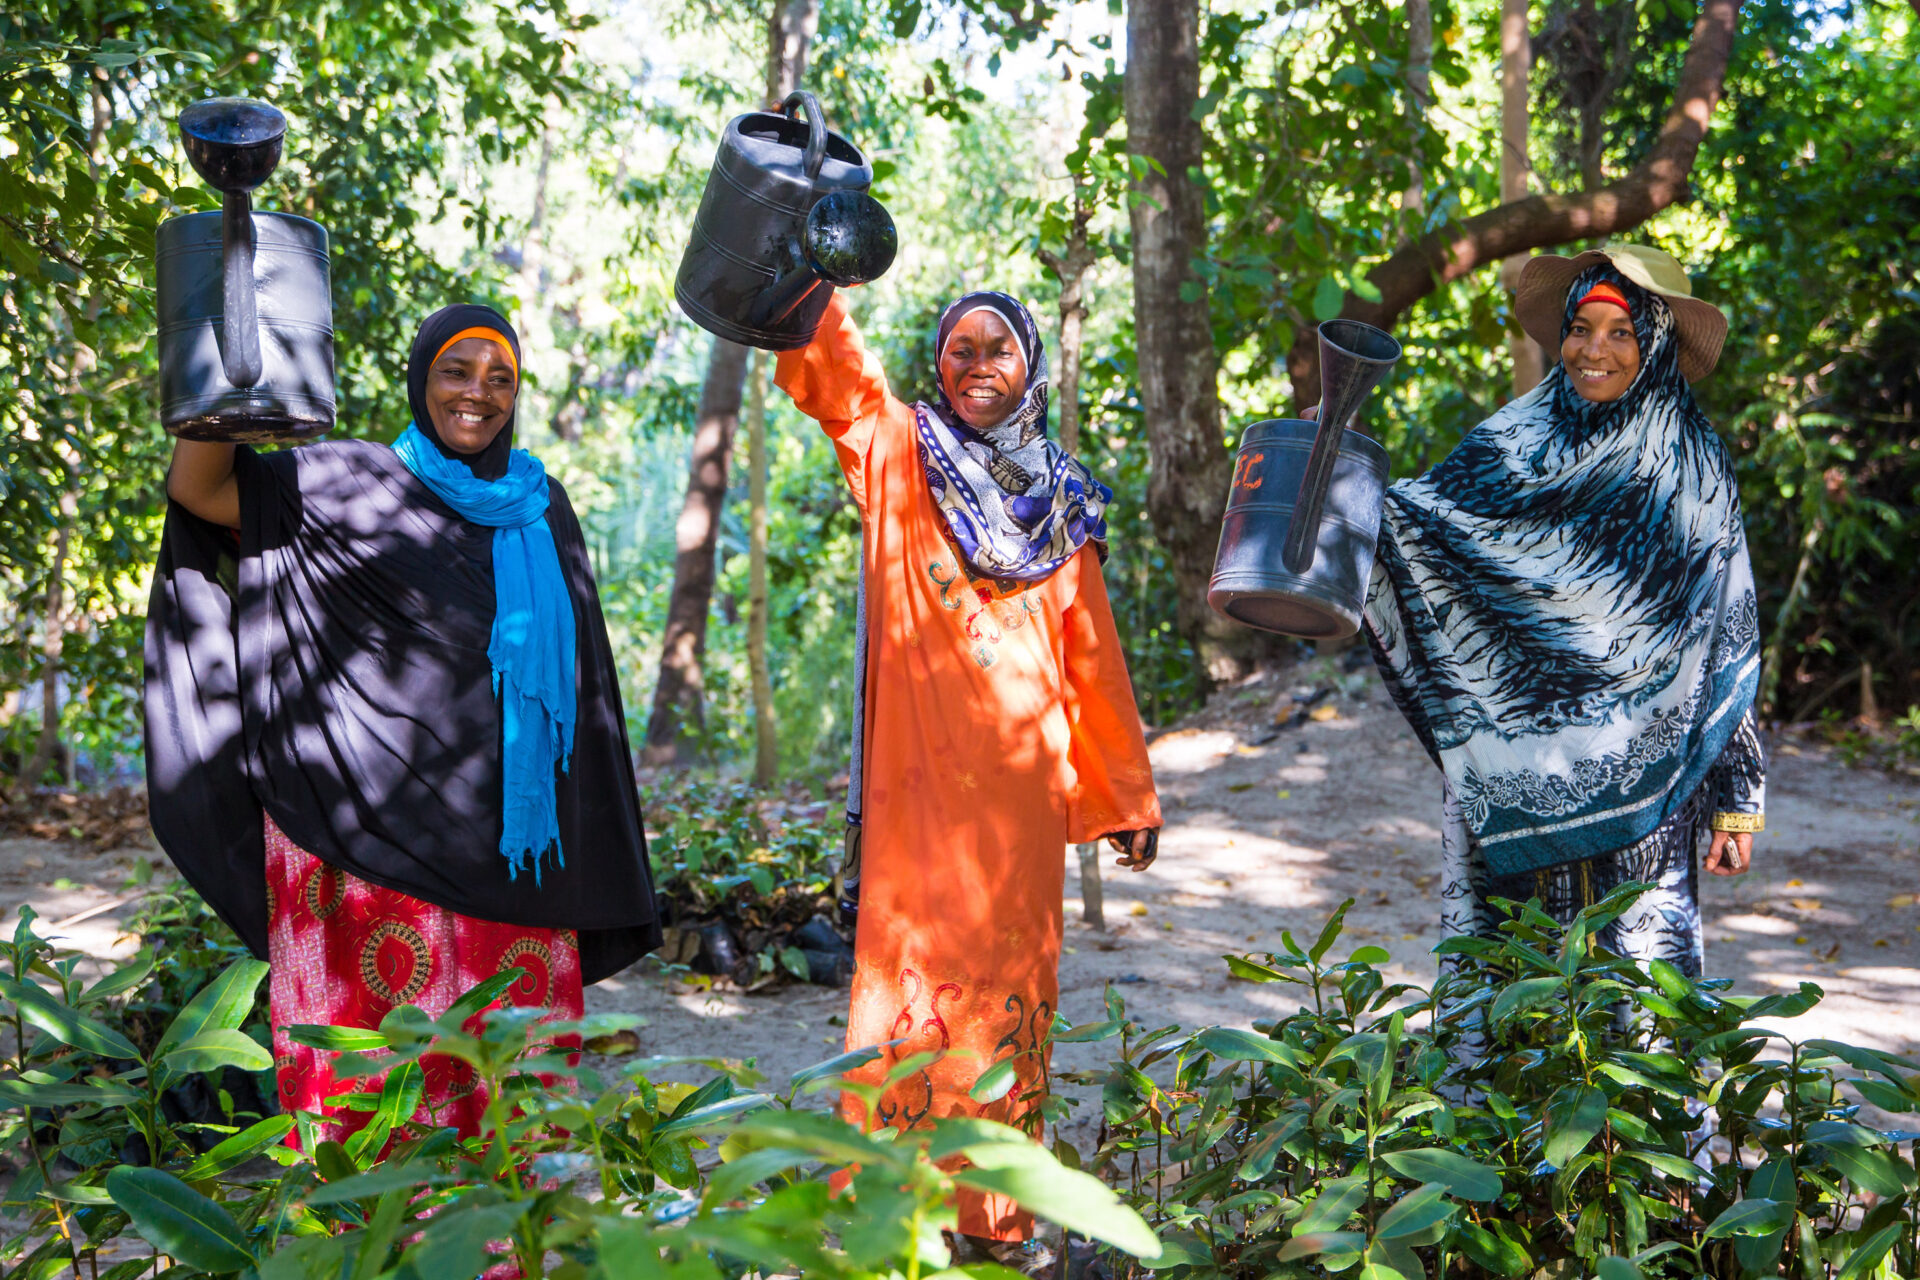 Women smile at the camera as they raise their watering cans in the air.